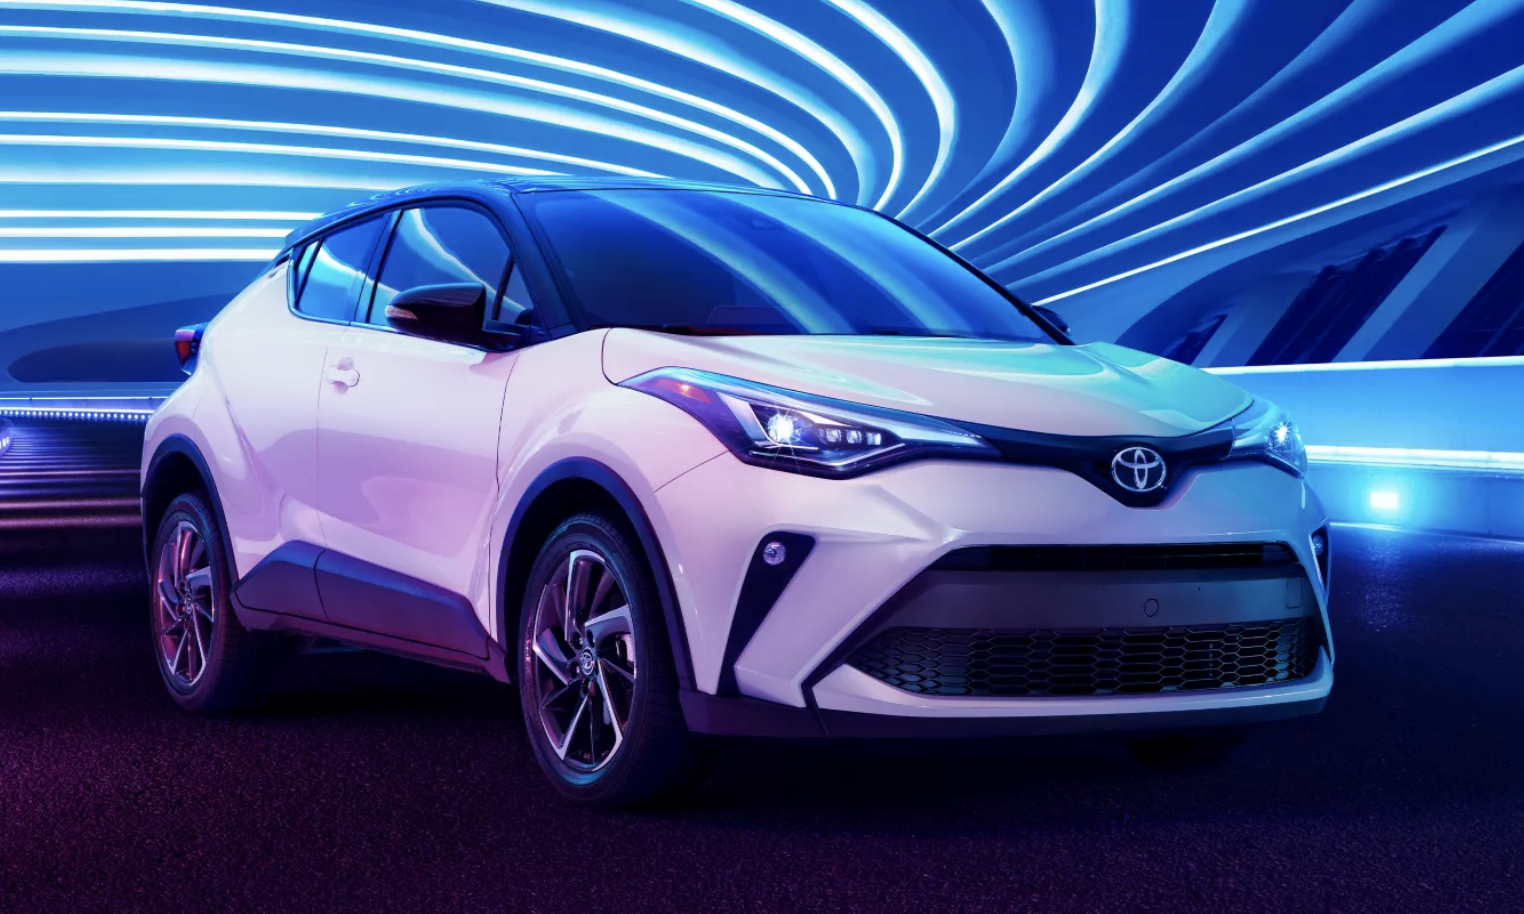 2022 Toyota C-HR for Sale or Lease | Toyota of Smithfield